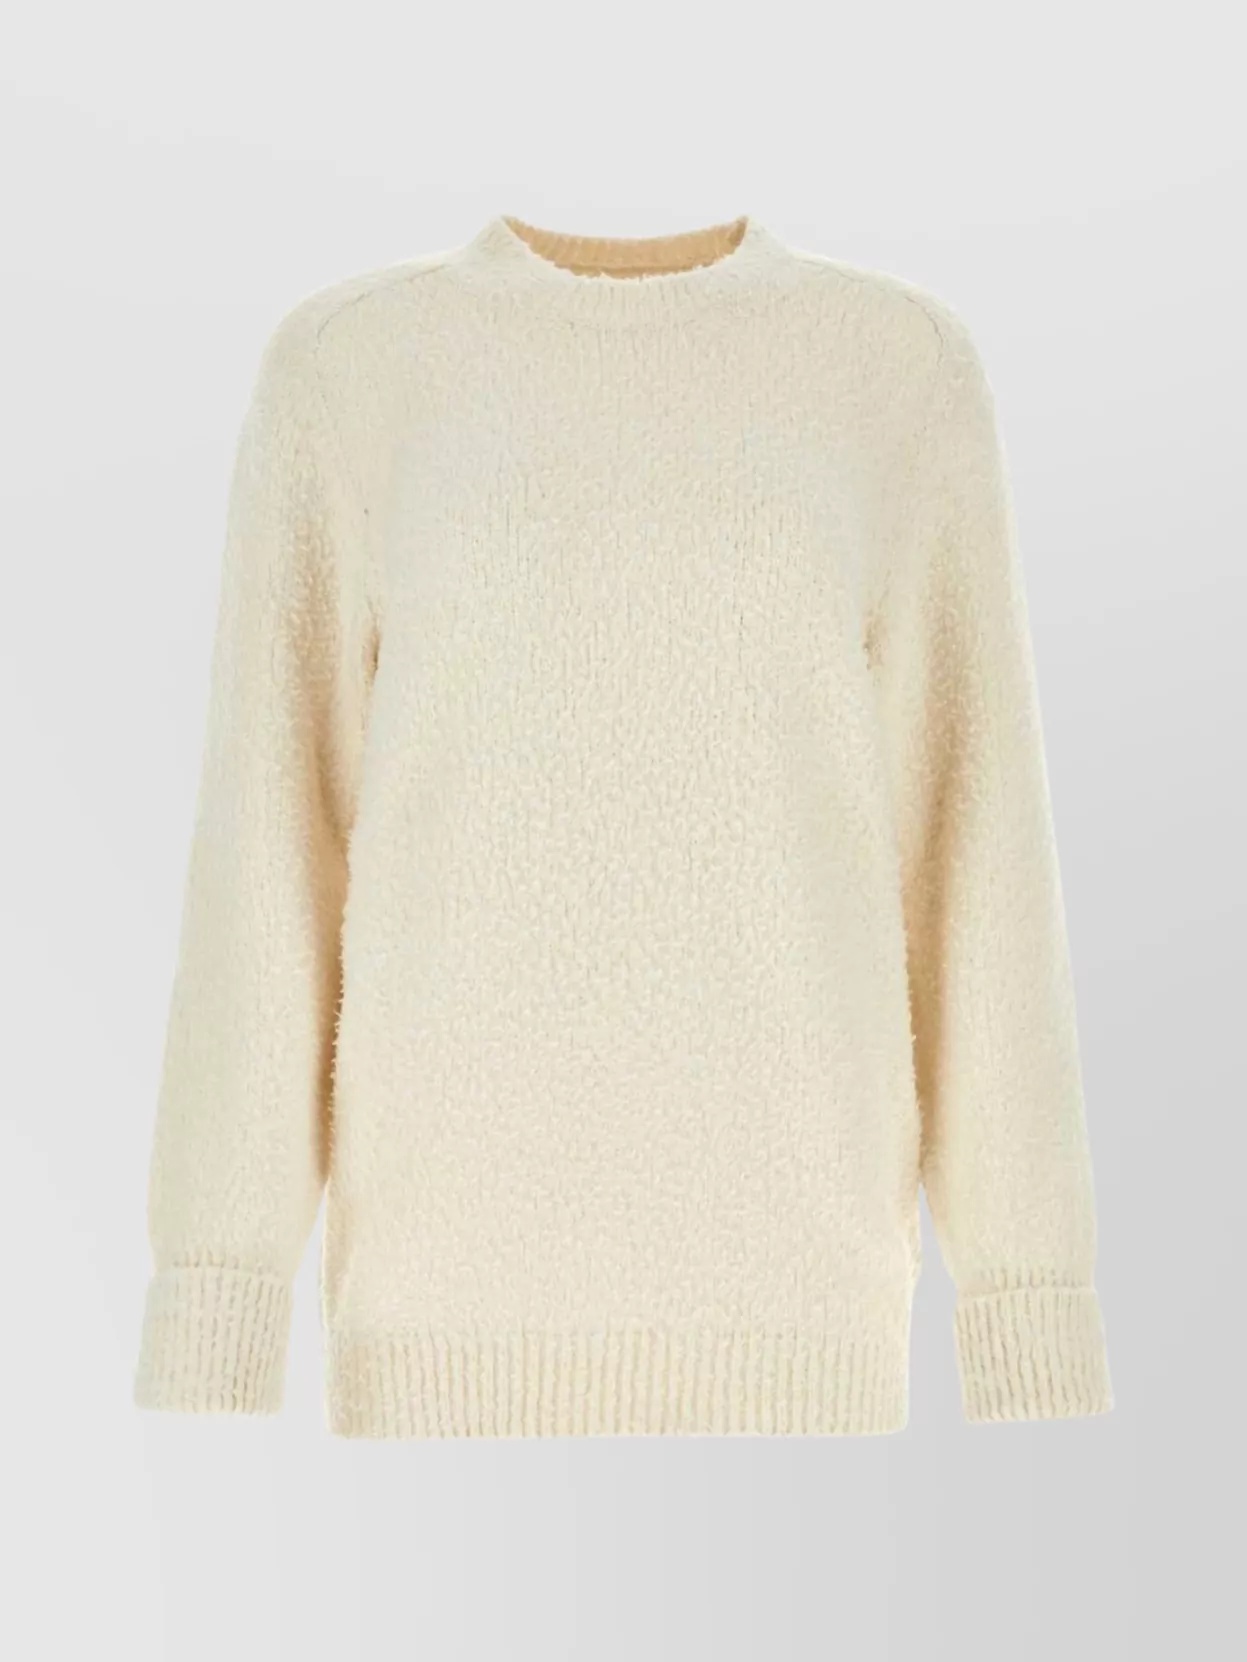 Maison Margiela Cotton Blend Crew Neck Sweater With Textured Finish In Neutral